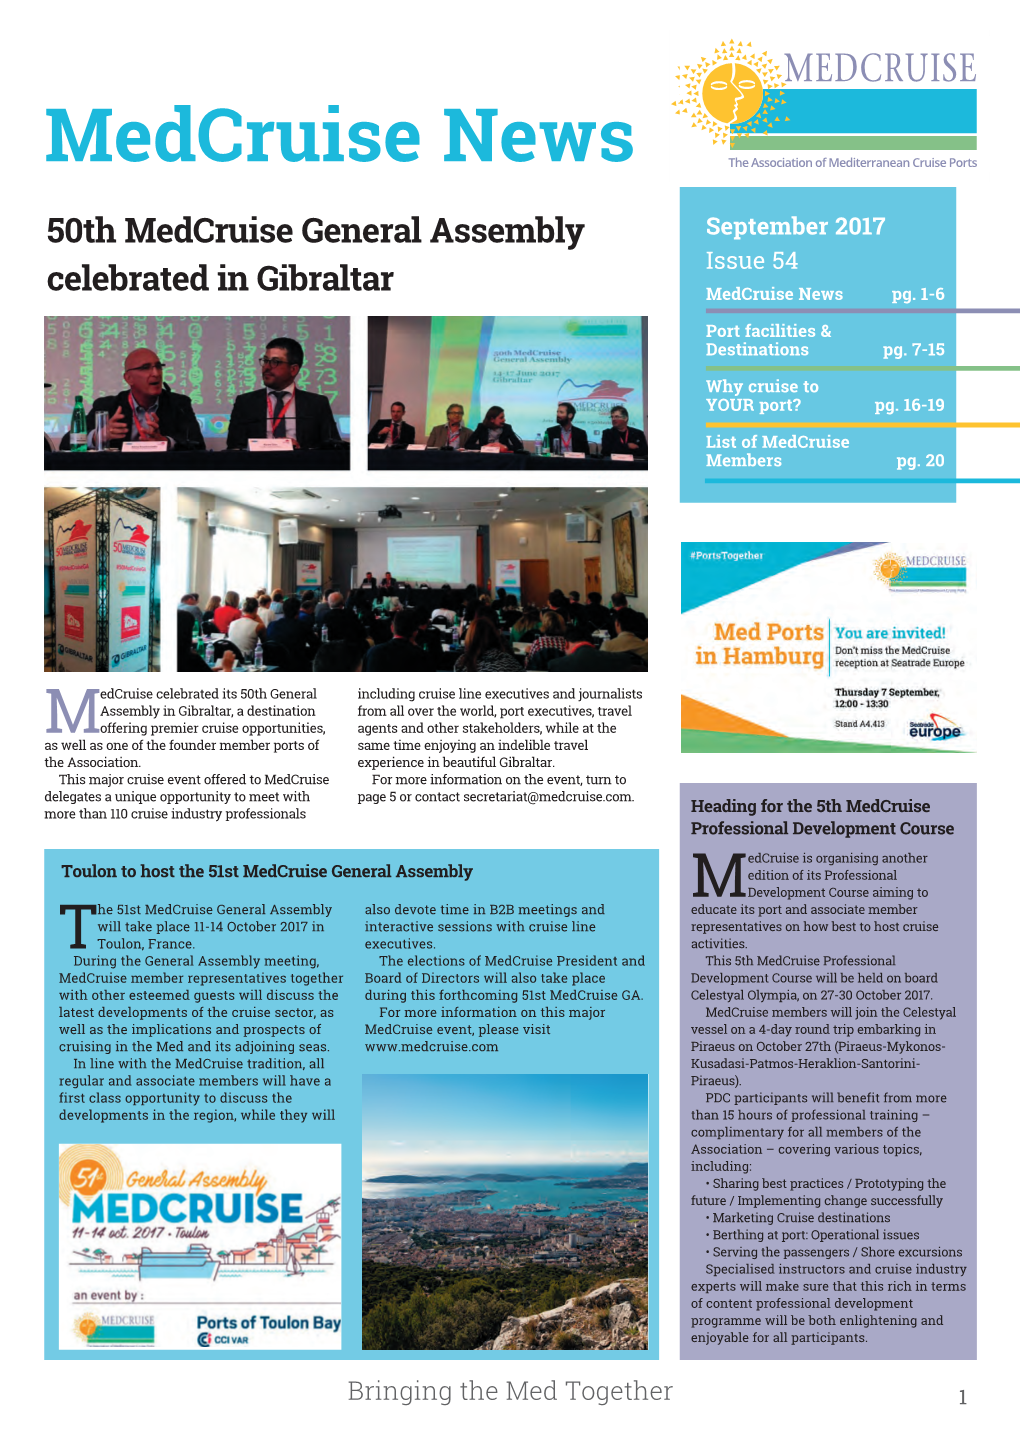 Medcruise Newsletter Issue 54 Sept 2017.Qxp 15/08/2017 10:23 Page 1